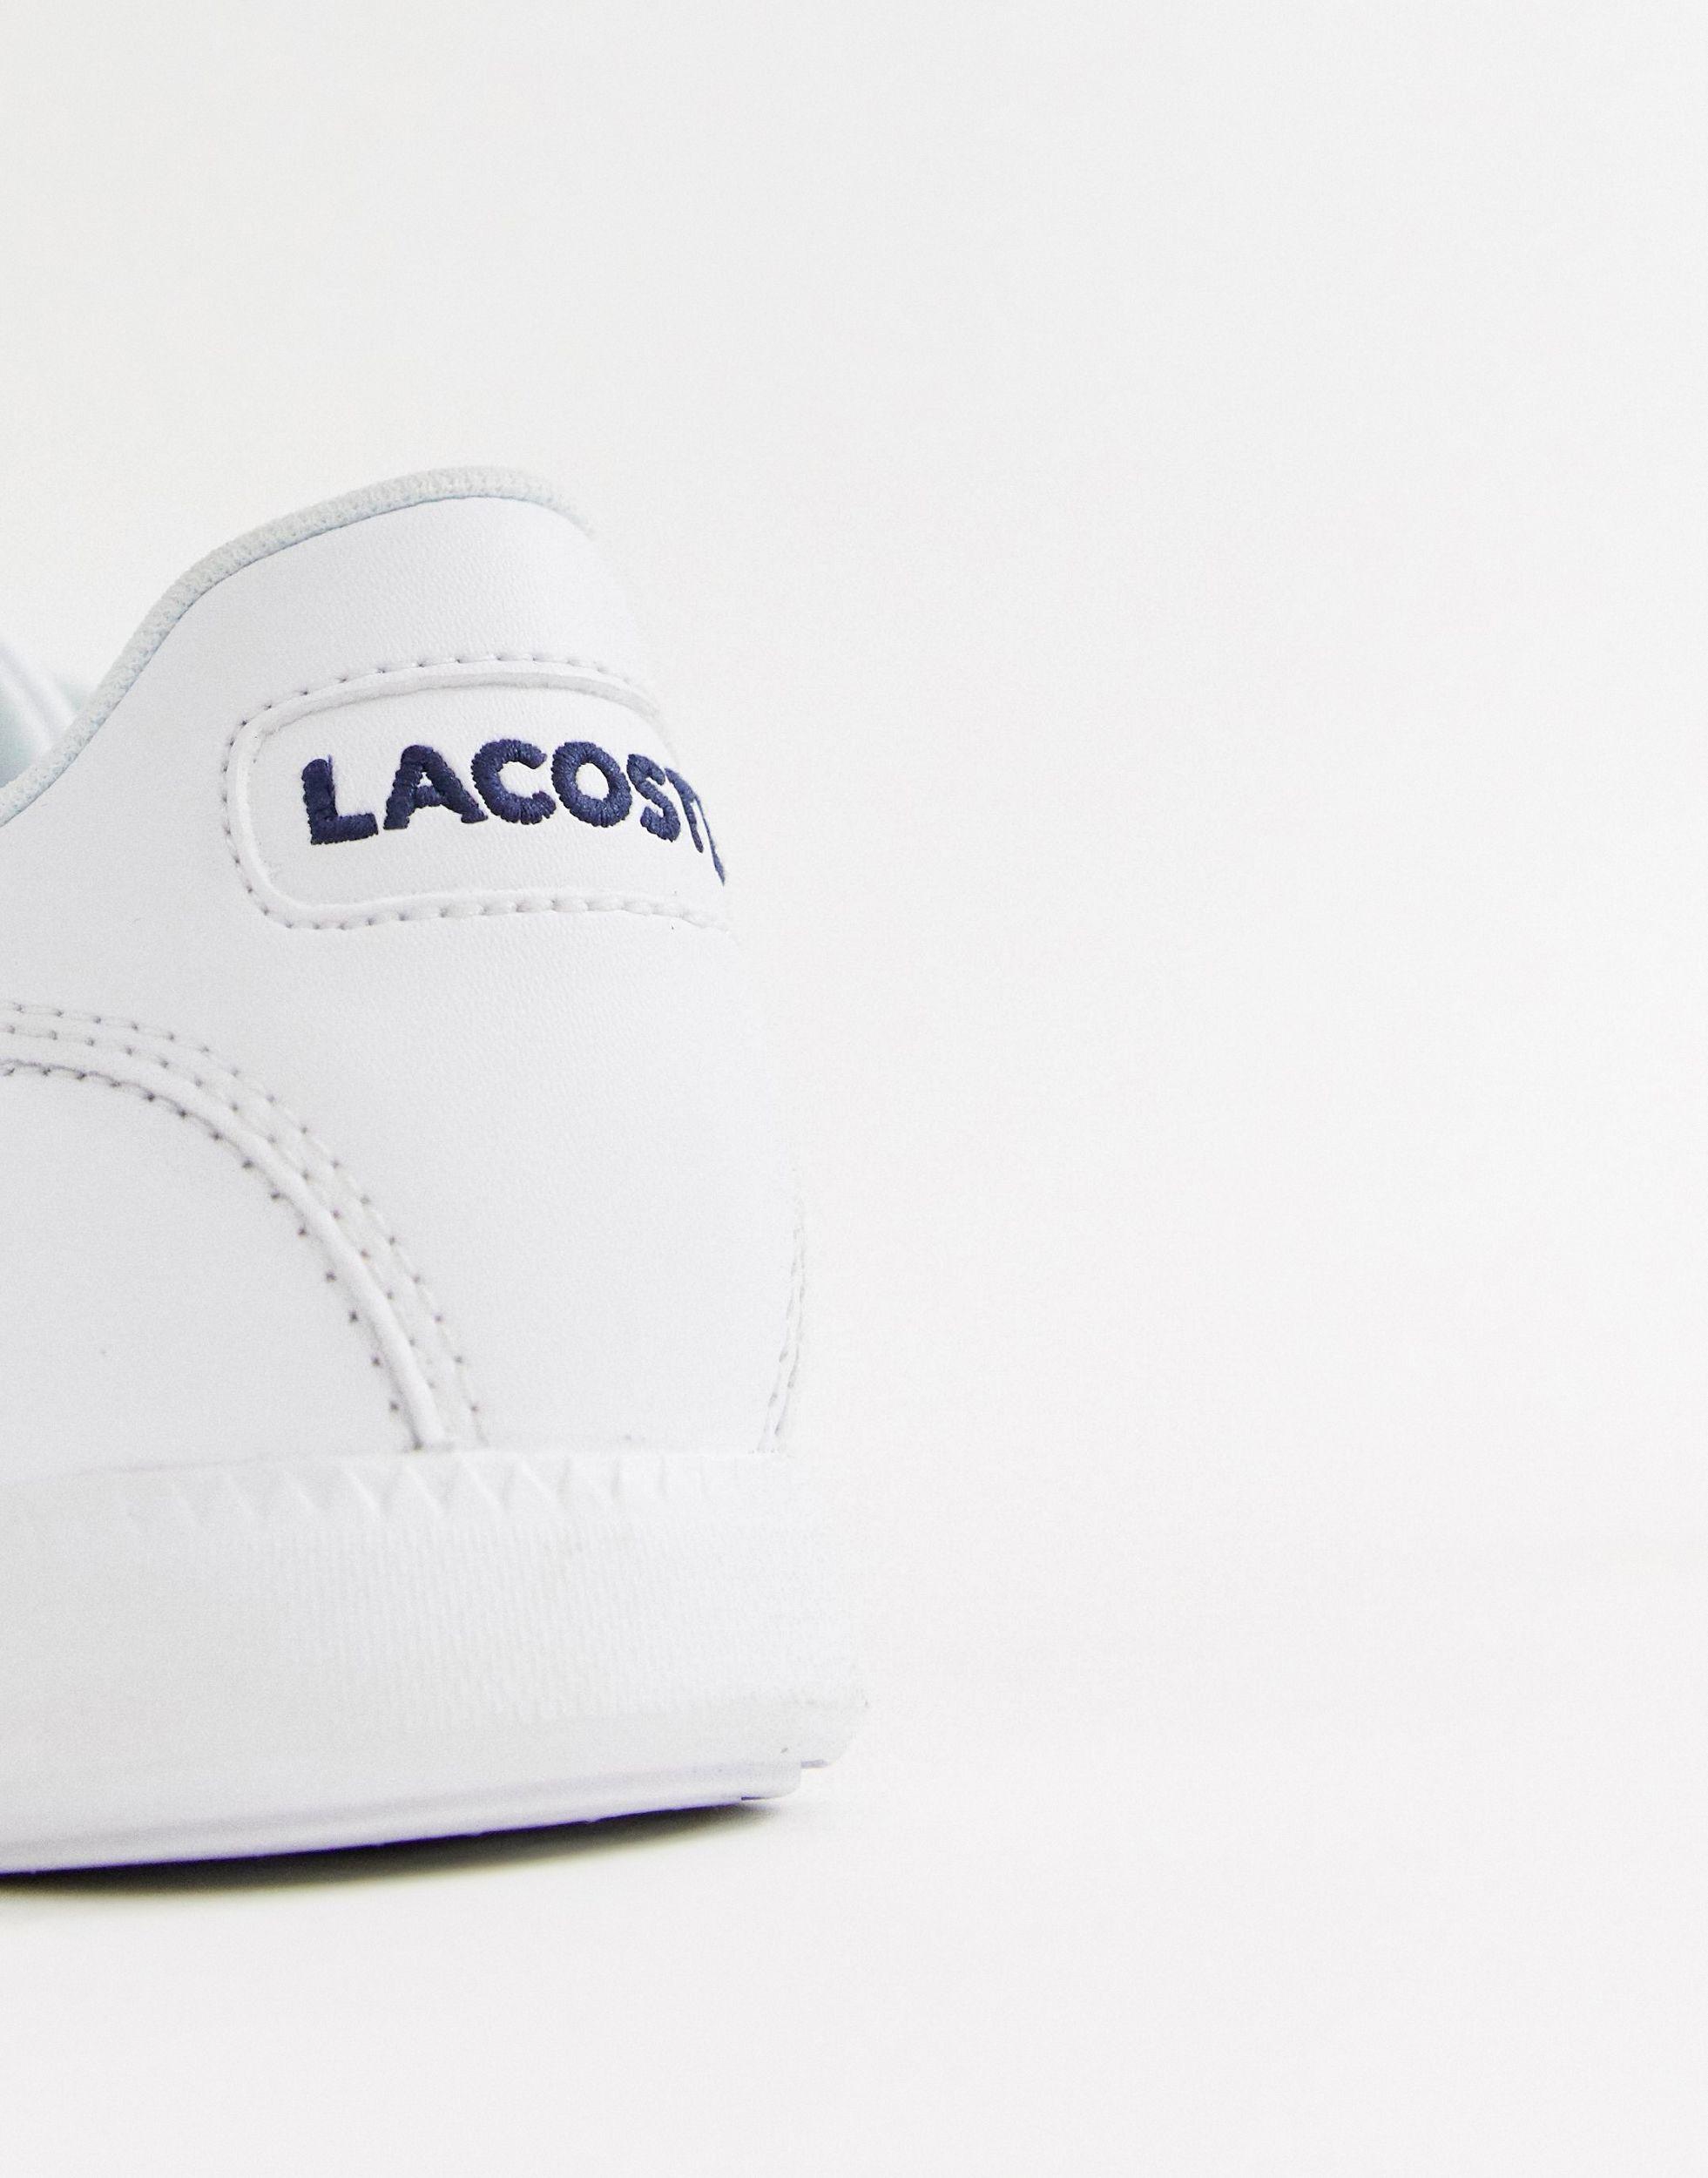 Lacoste Straightset Bl1 Spw Trainers in White - Save 44% | Lyst